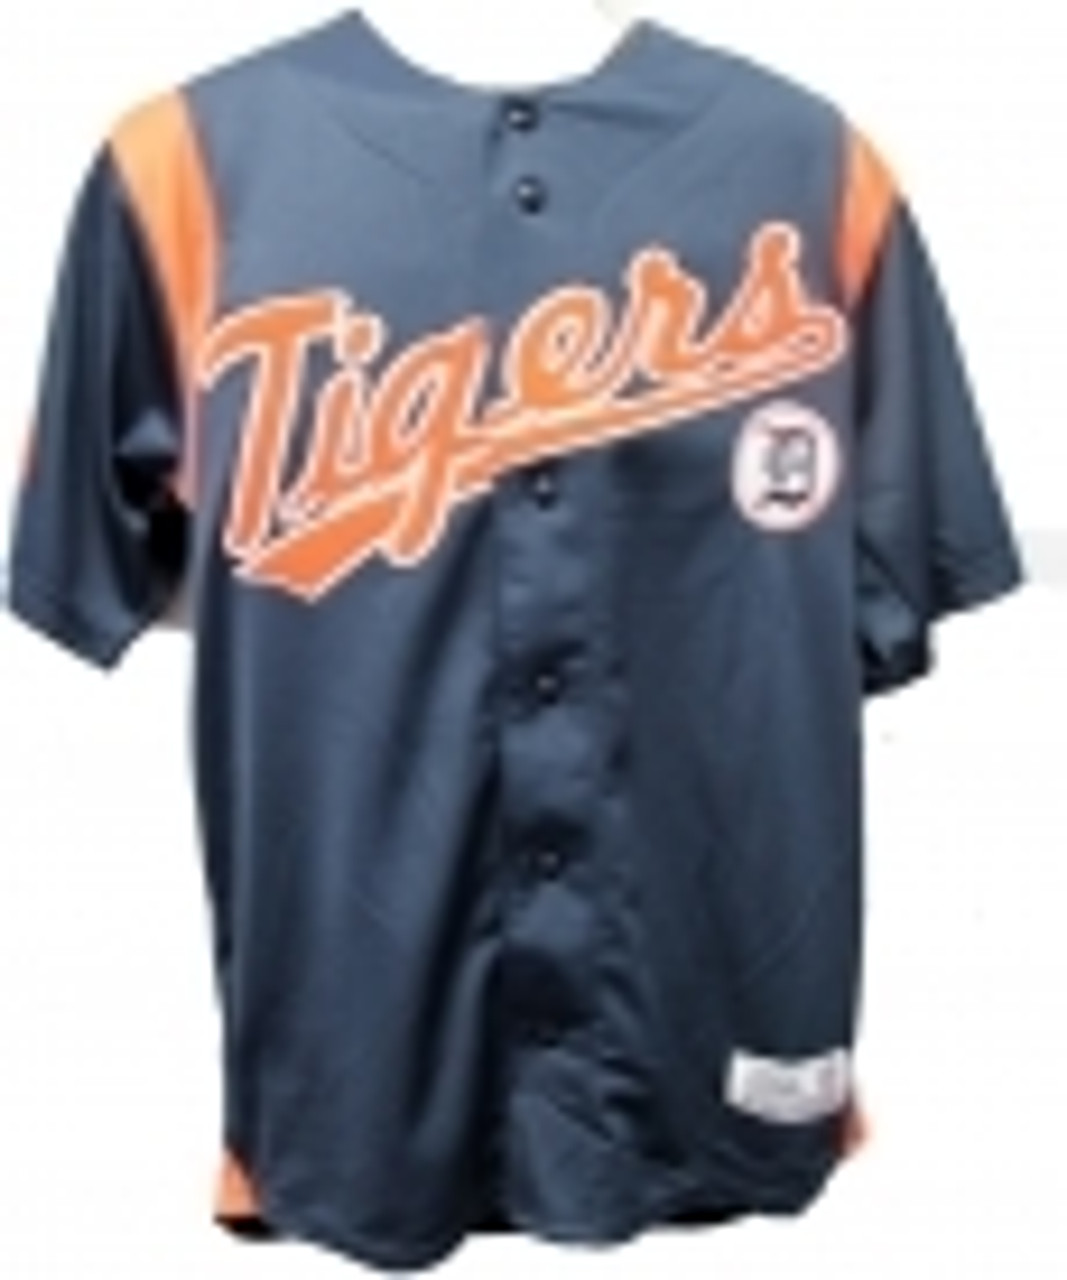 MLB Detroit Tigers Baseball Jersey Stitched Lettering (Large